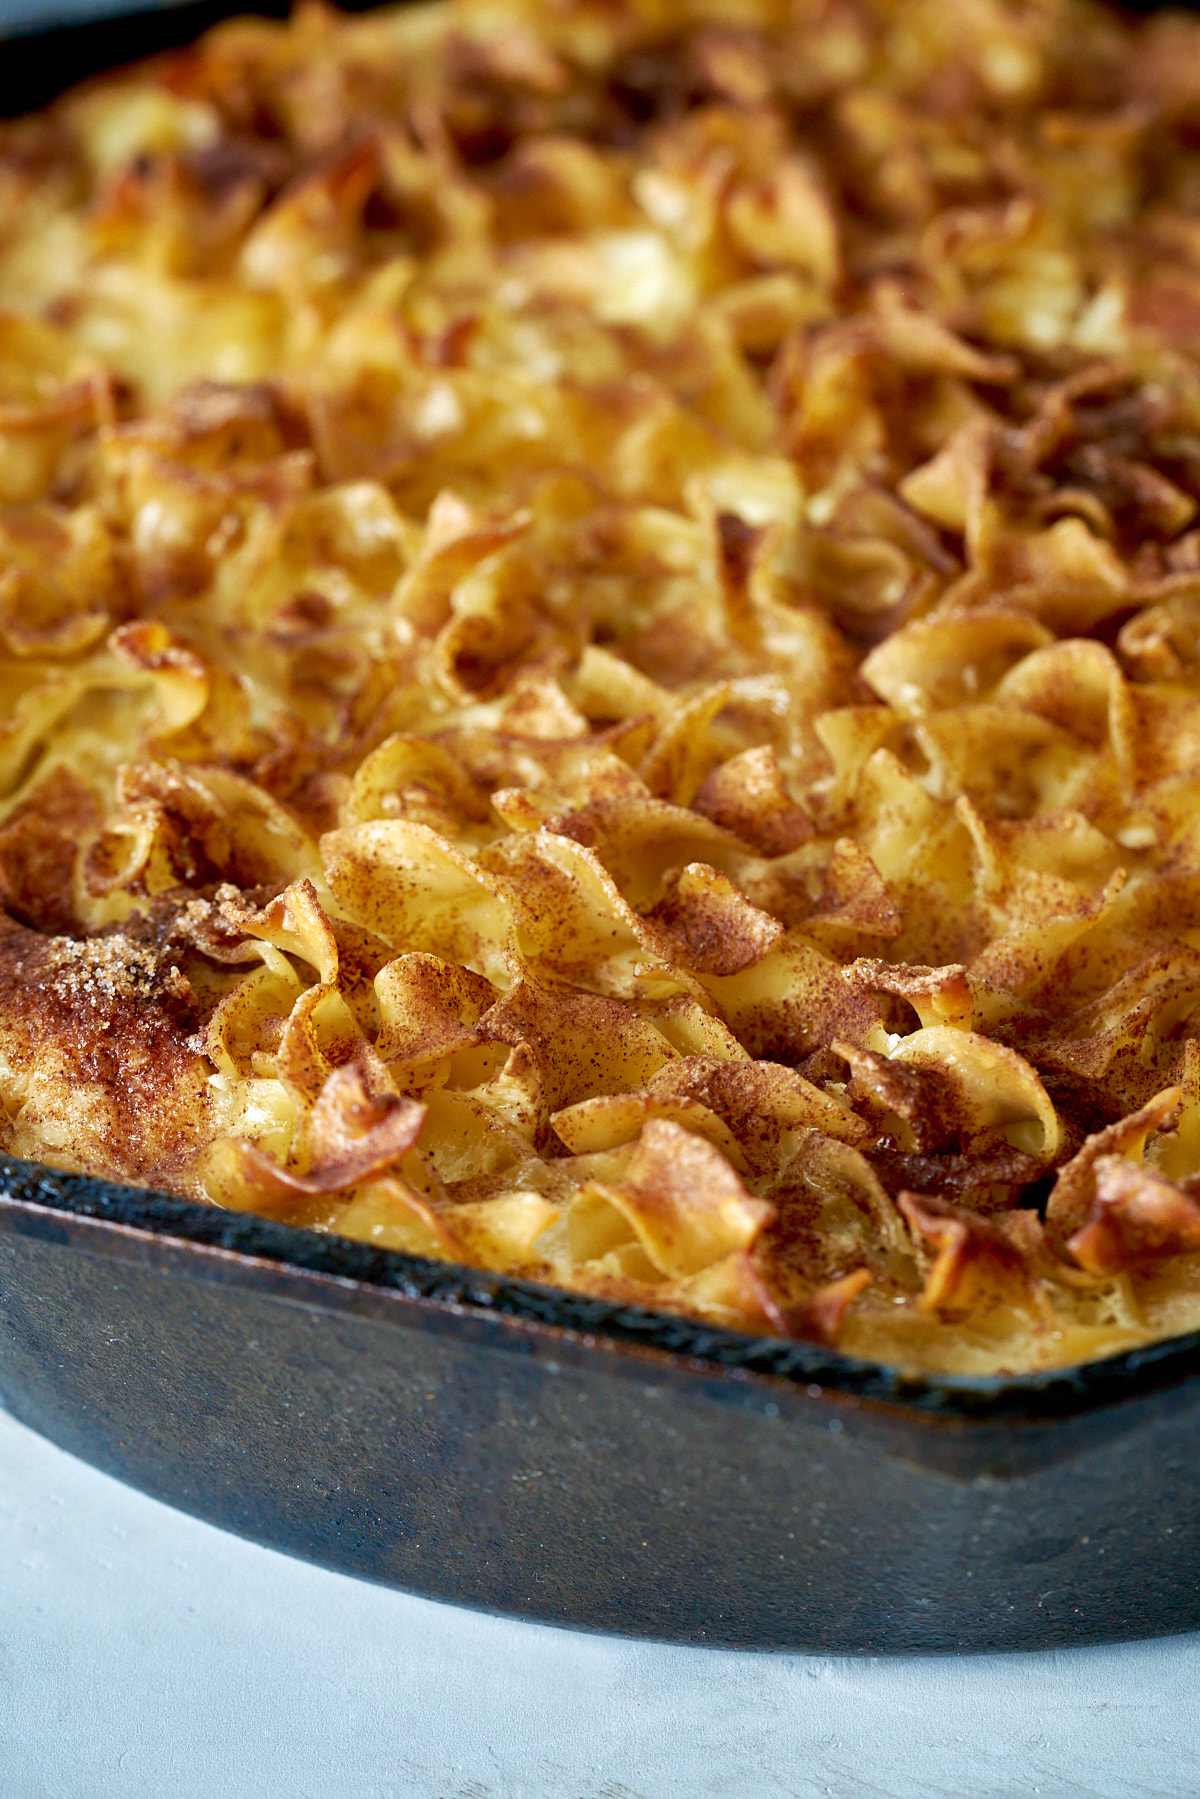 Baked noodle casserole with cinnamon topping.